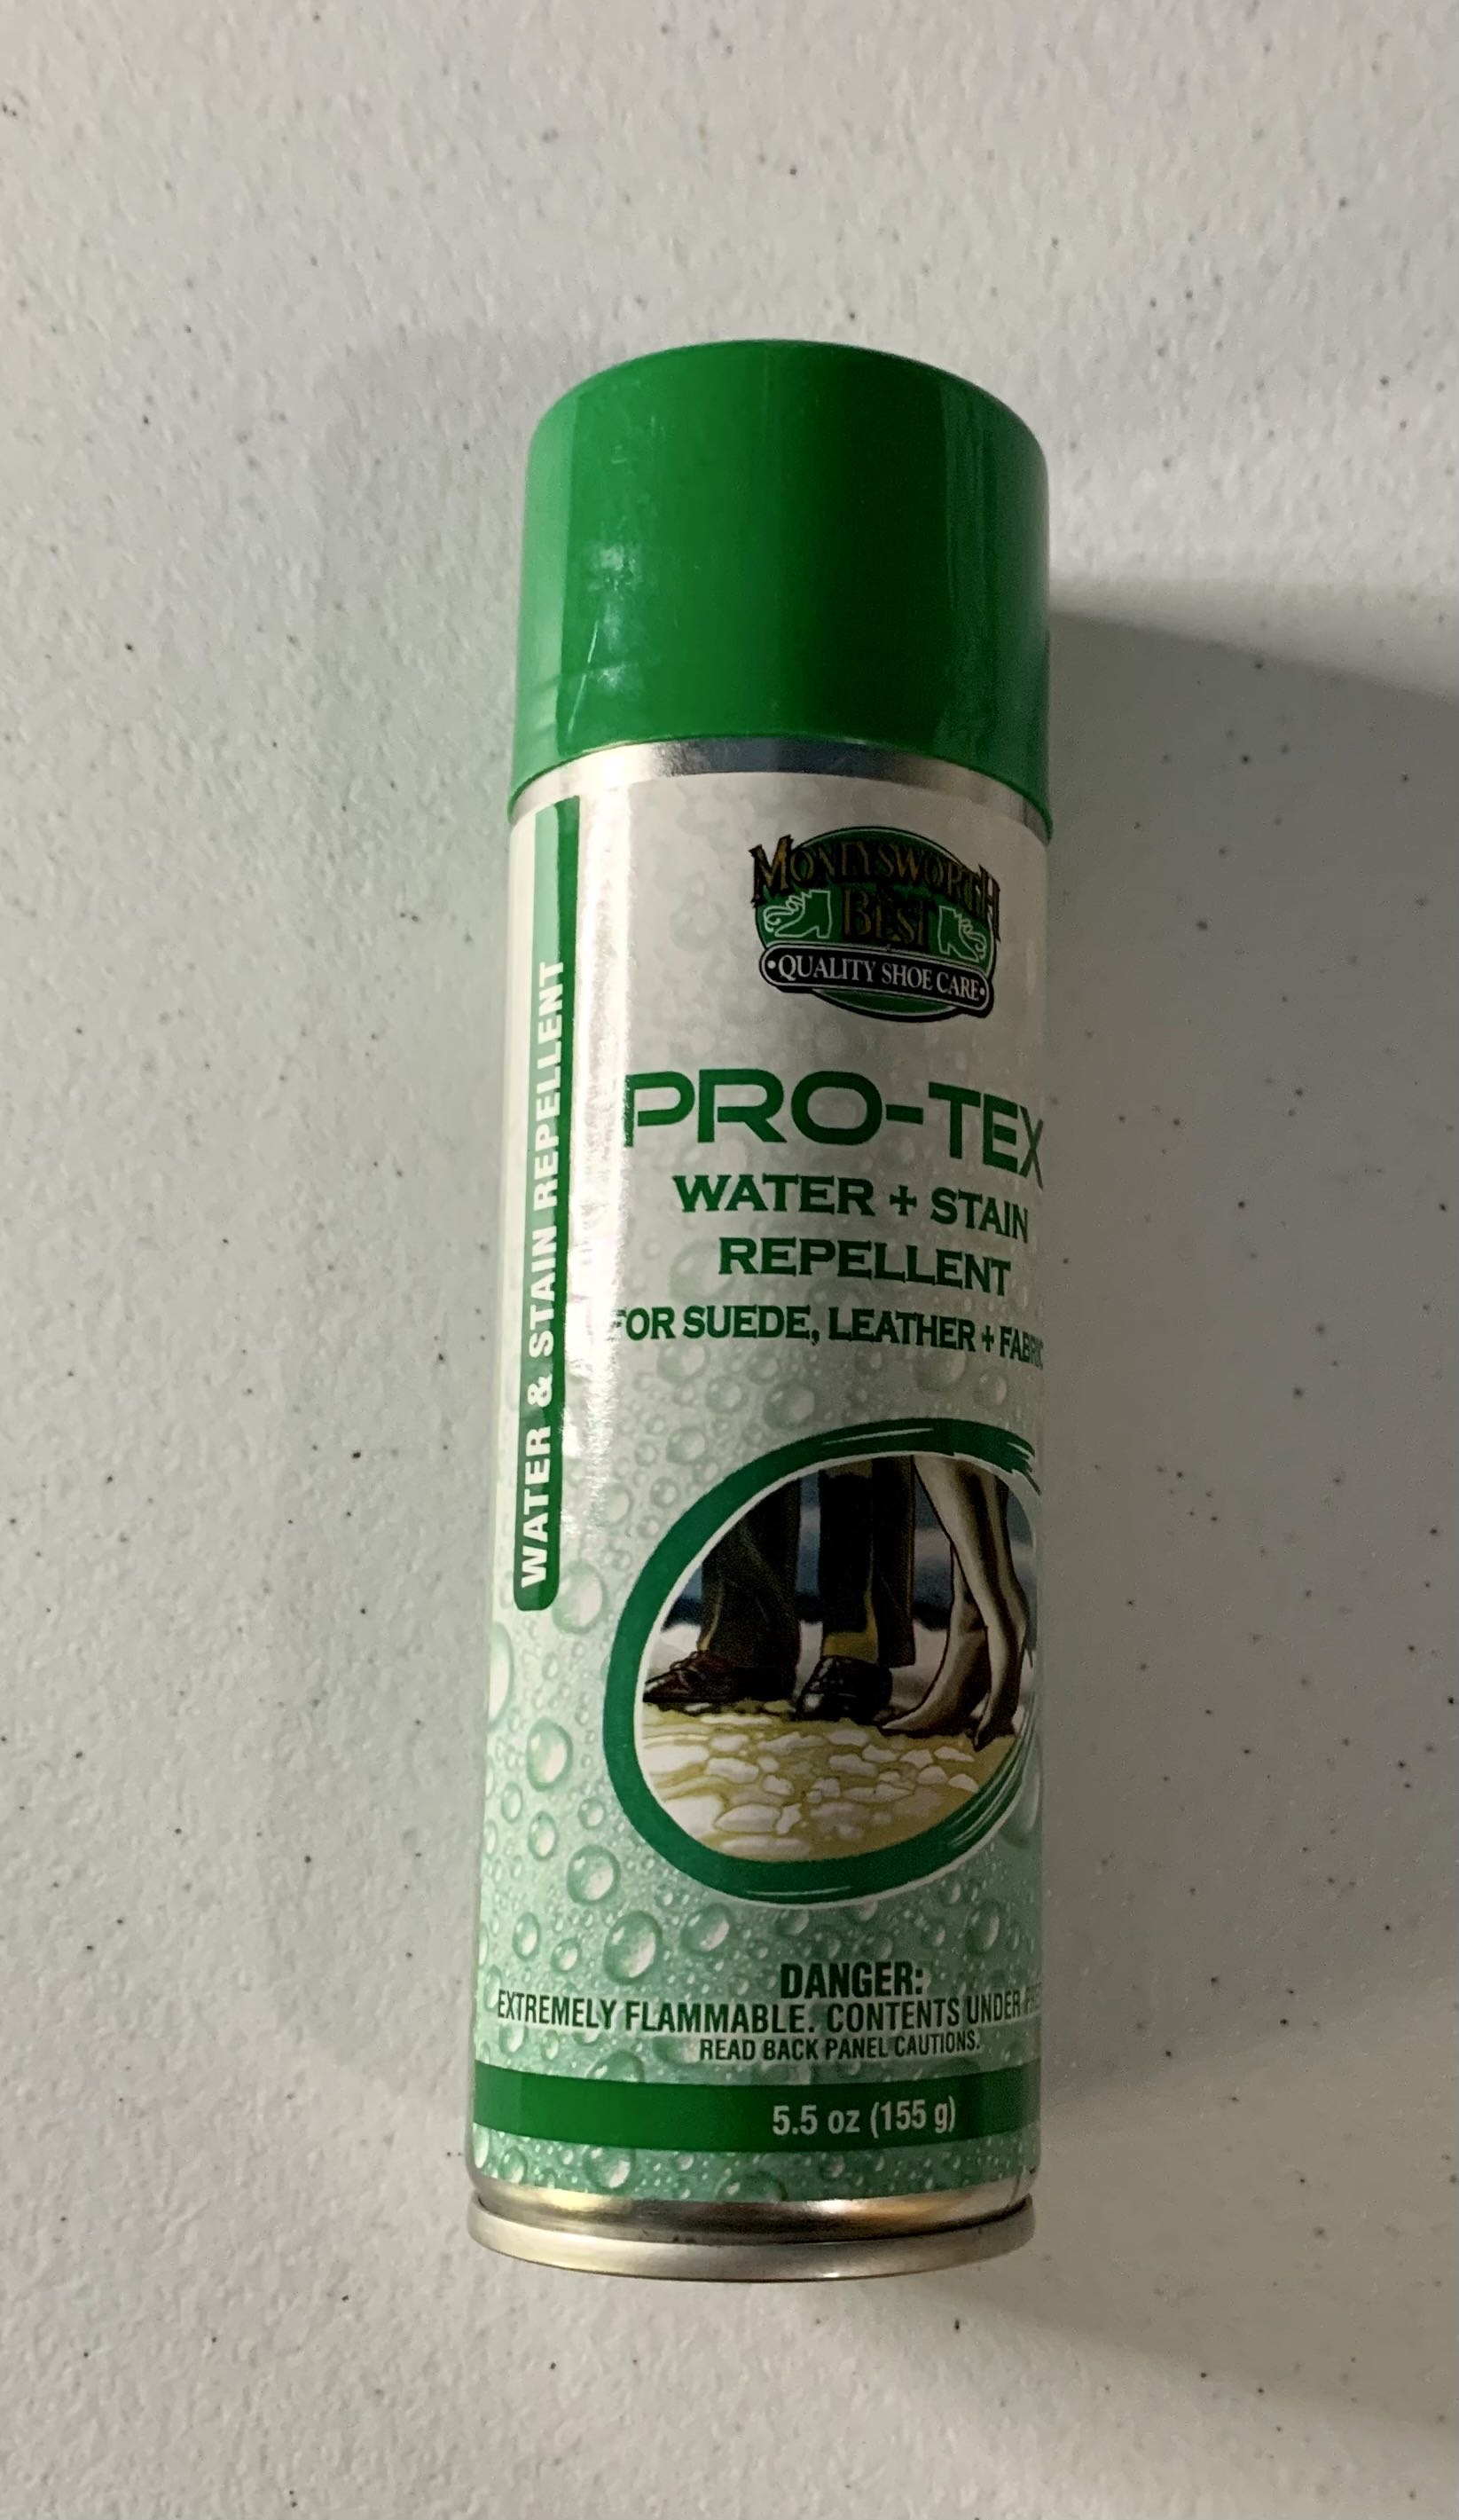 Moneysworth & Best Protex Water and Stain Shoe Protector 300g